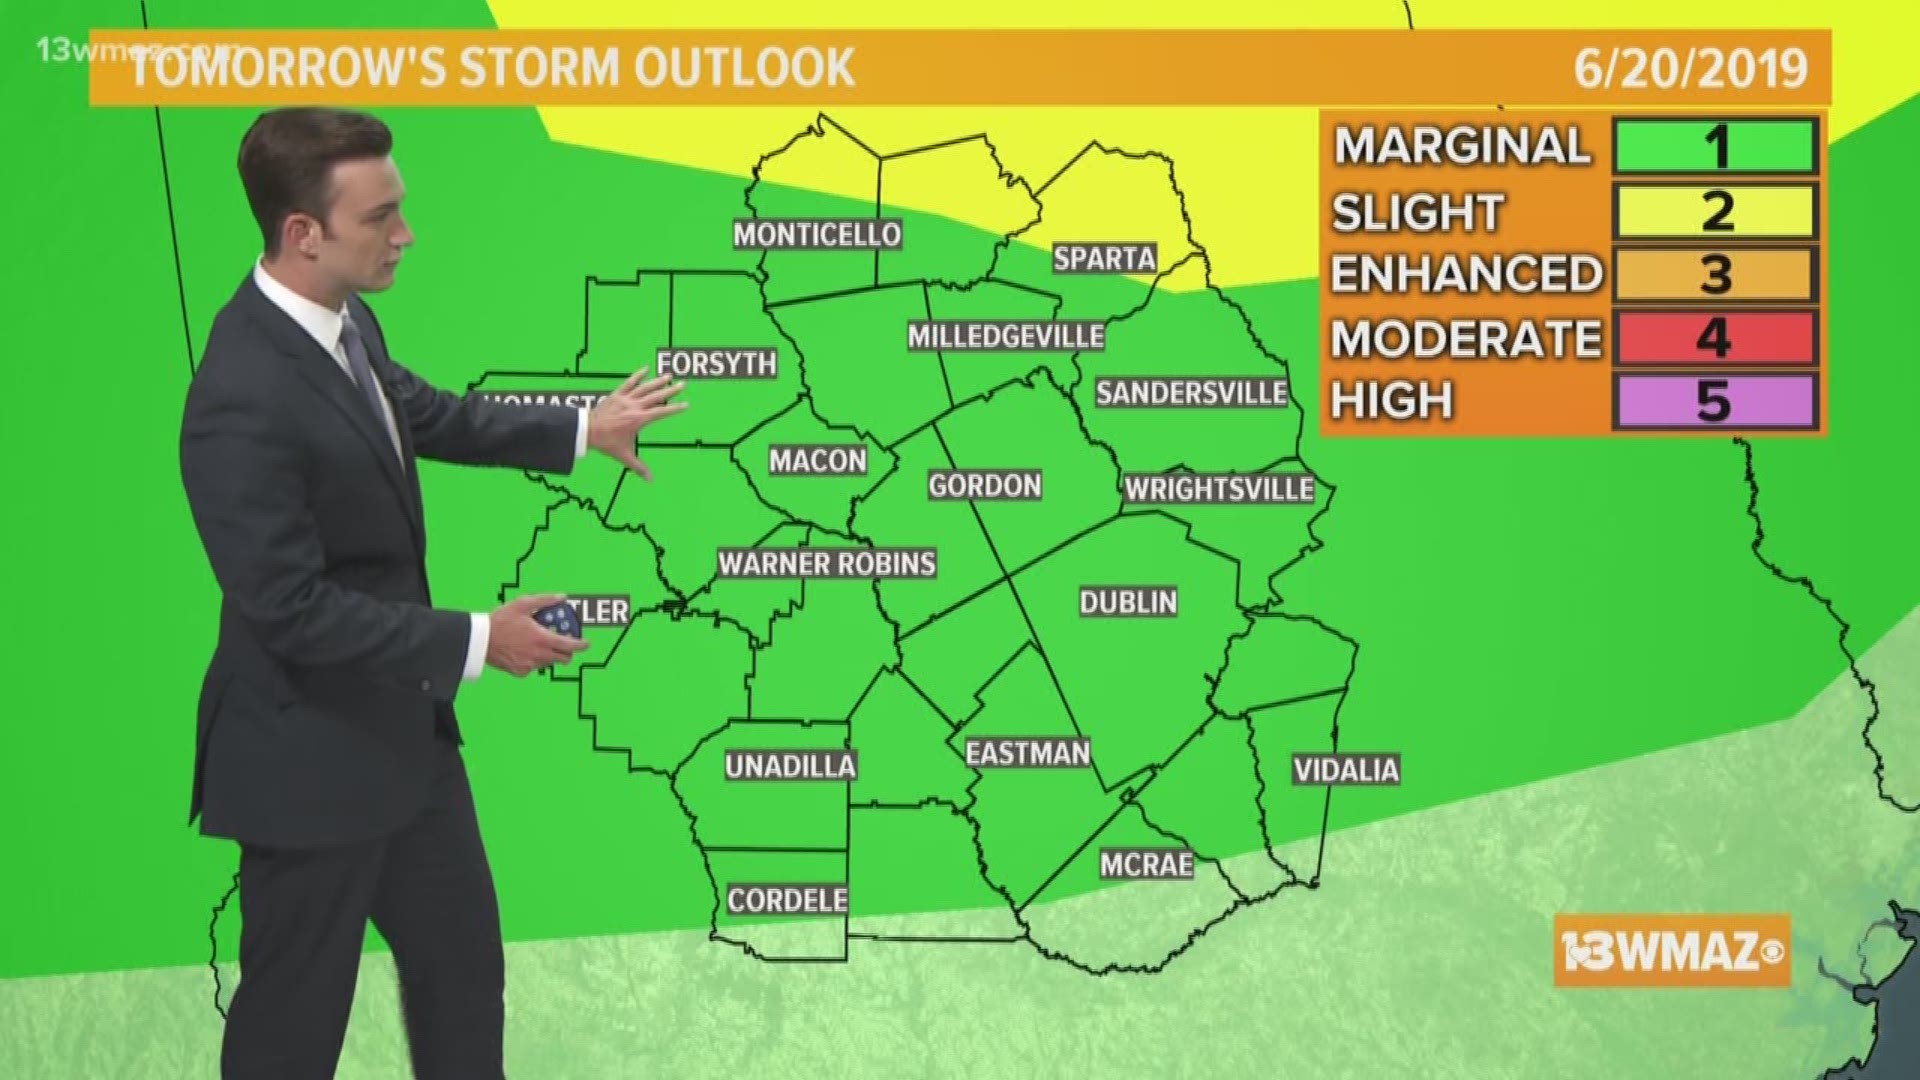 Scattered storms for Wednesday afternoon